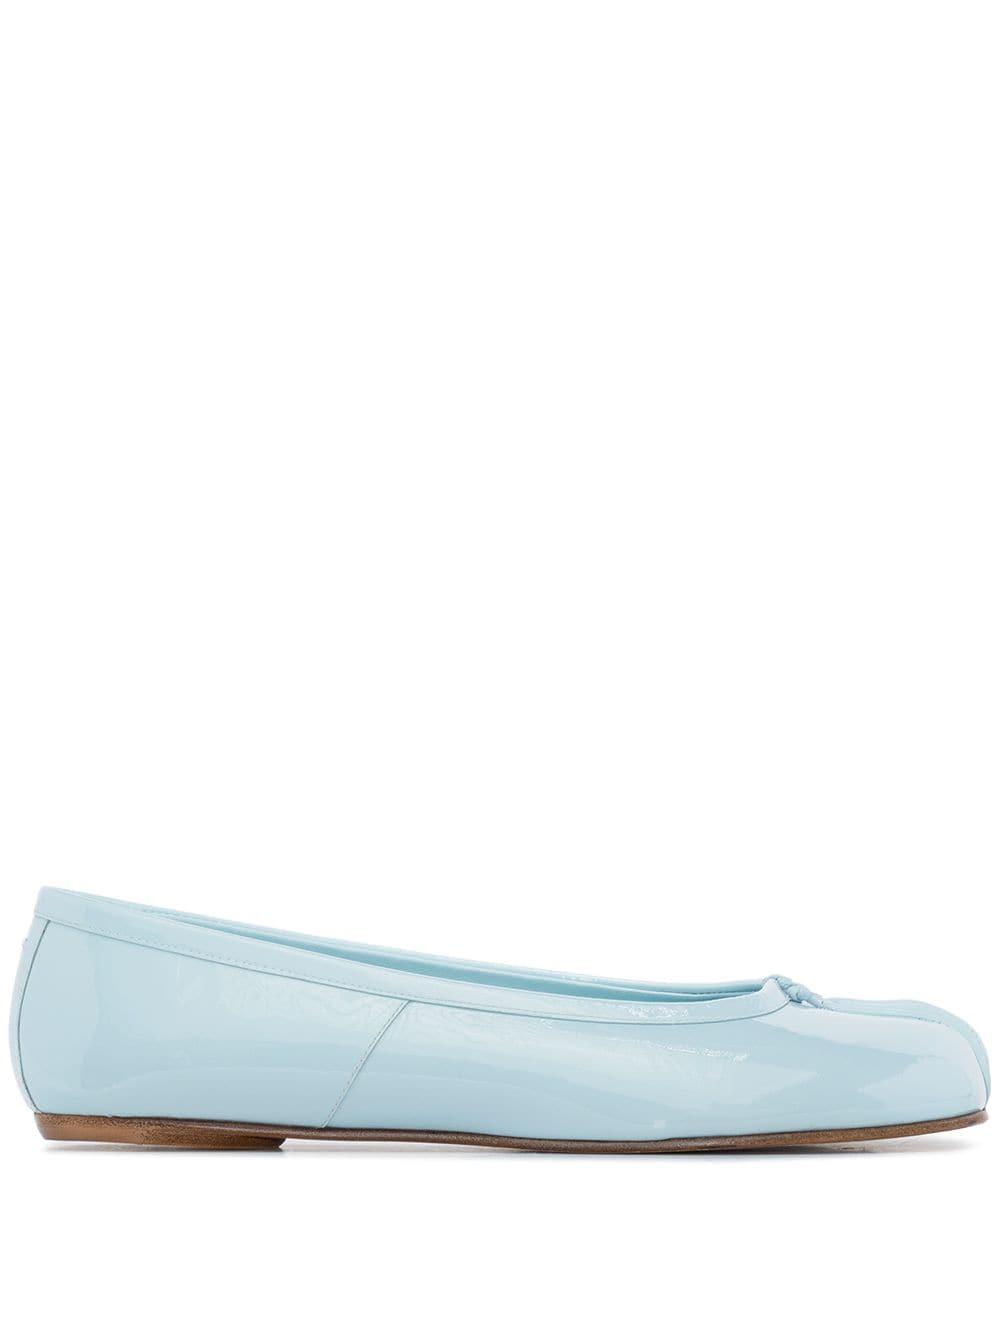 Womens Shoes Flats and flat shoes Ballet flats and ballerina shoes Maison Margiela Tabi H30 Ballerinas in Blue 